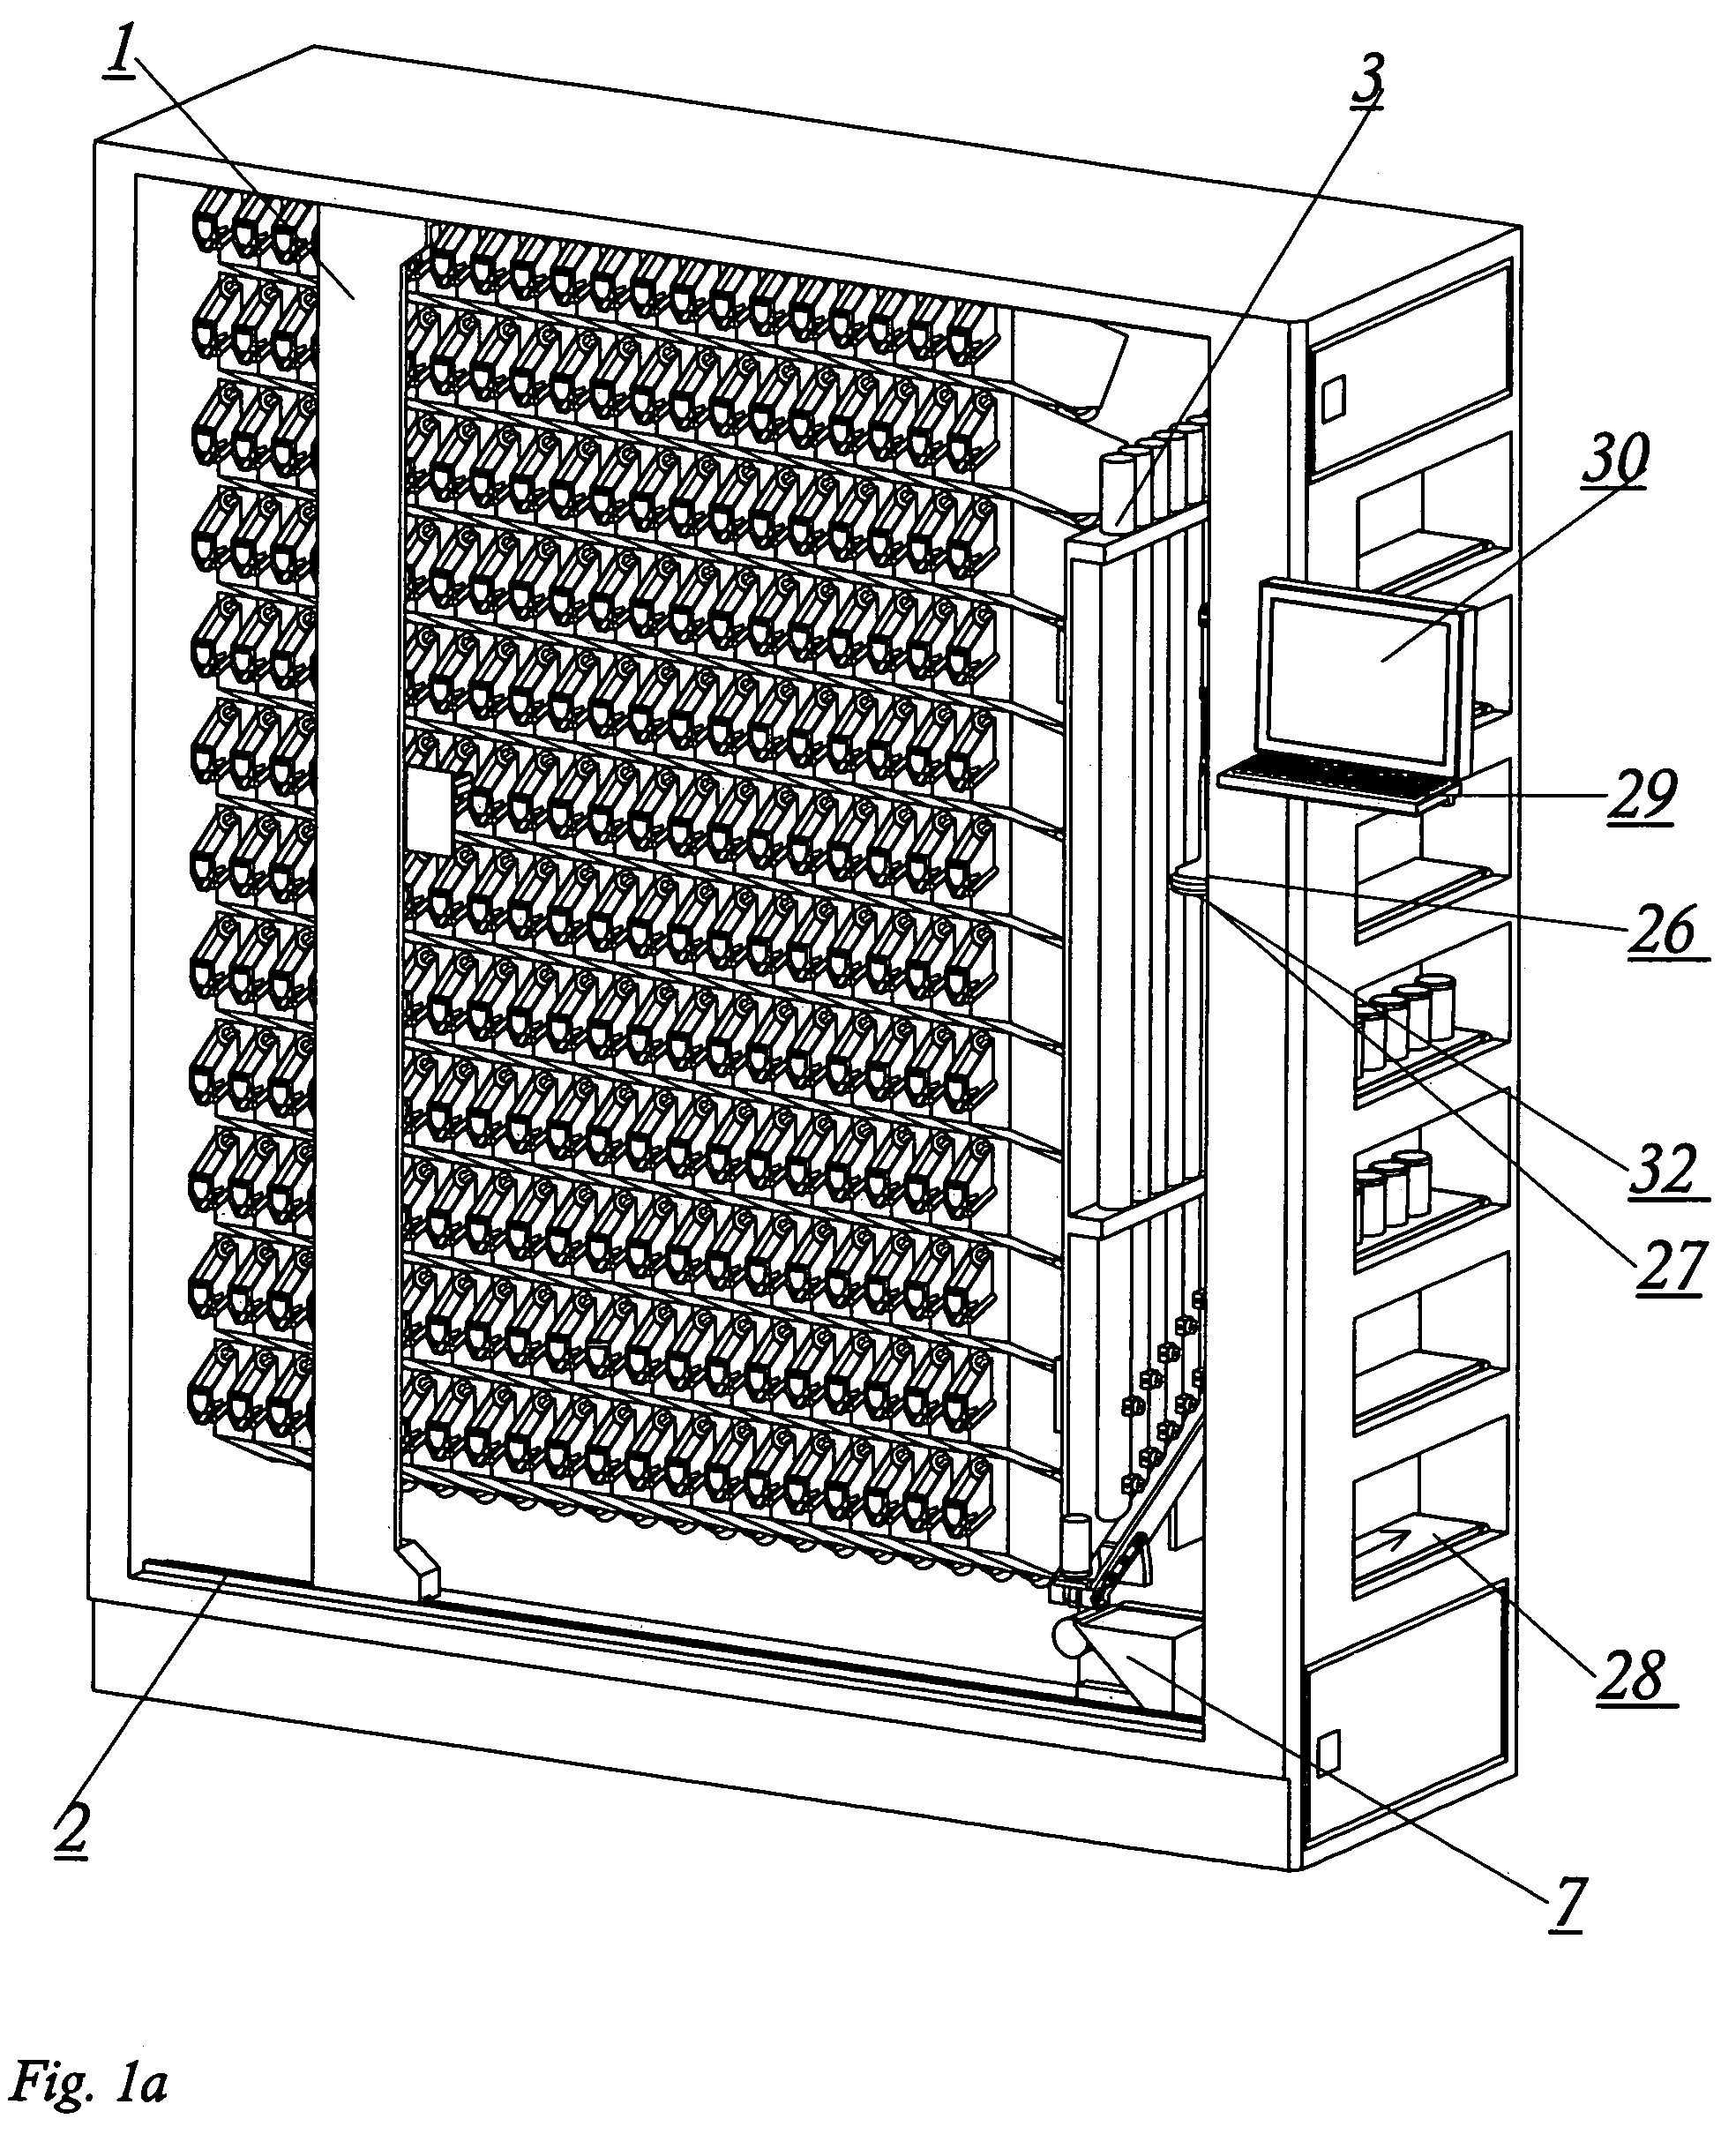 Pharmaceutical dispensing system for medicament and pre-packaged medication